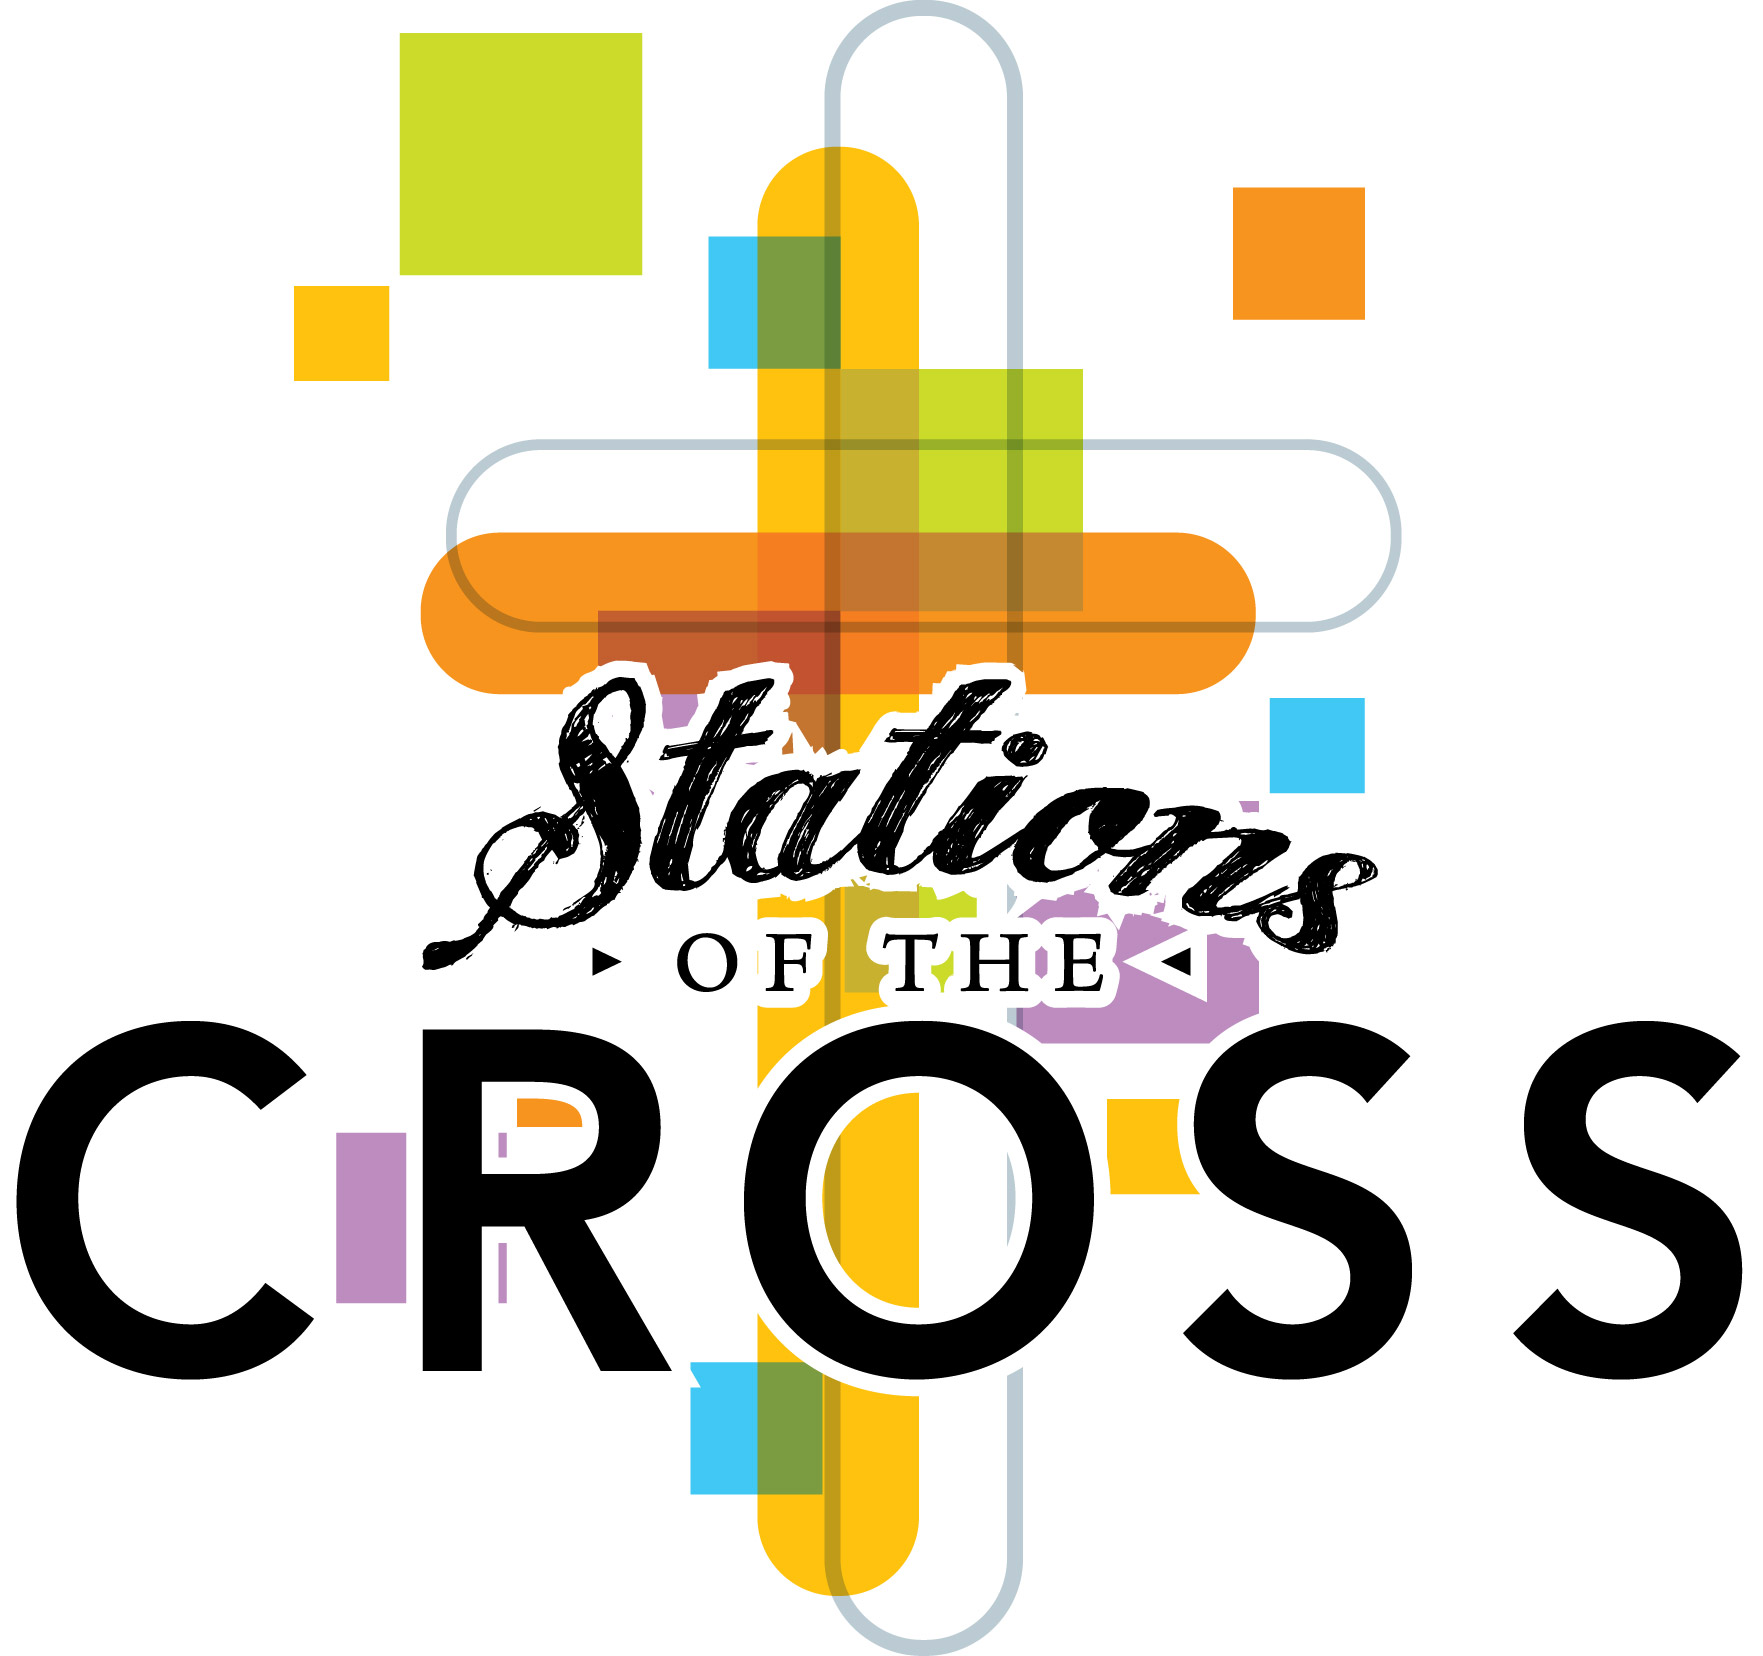 stations-of-the-cross-clipart-clipground-images-and-photos-finder